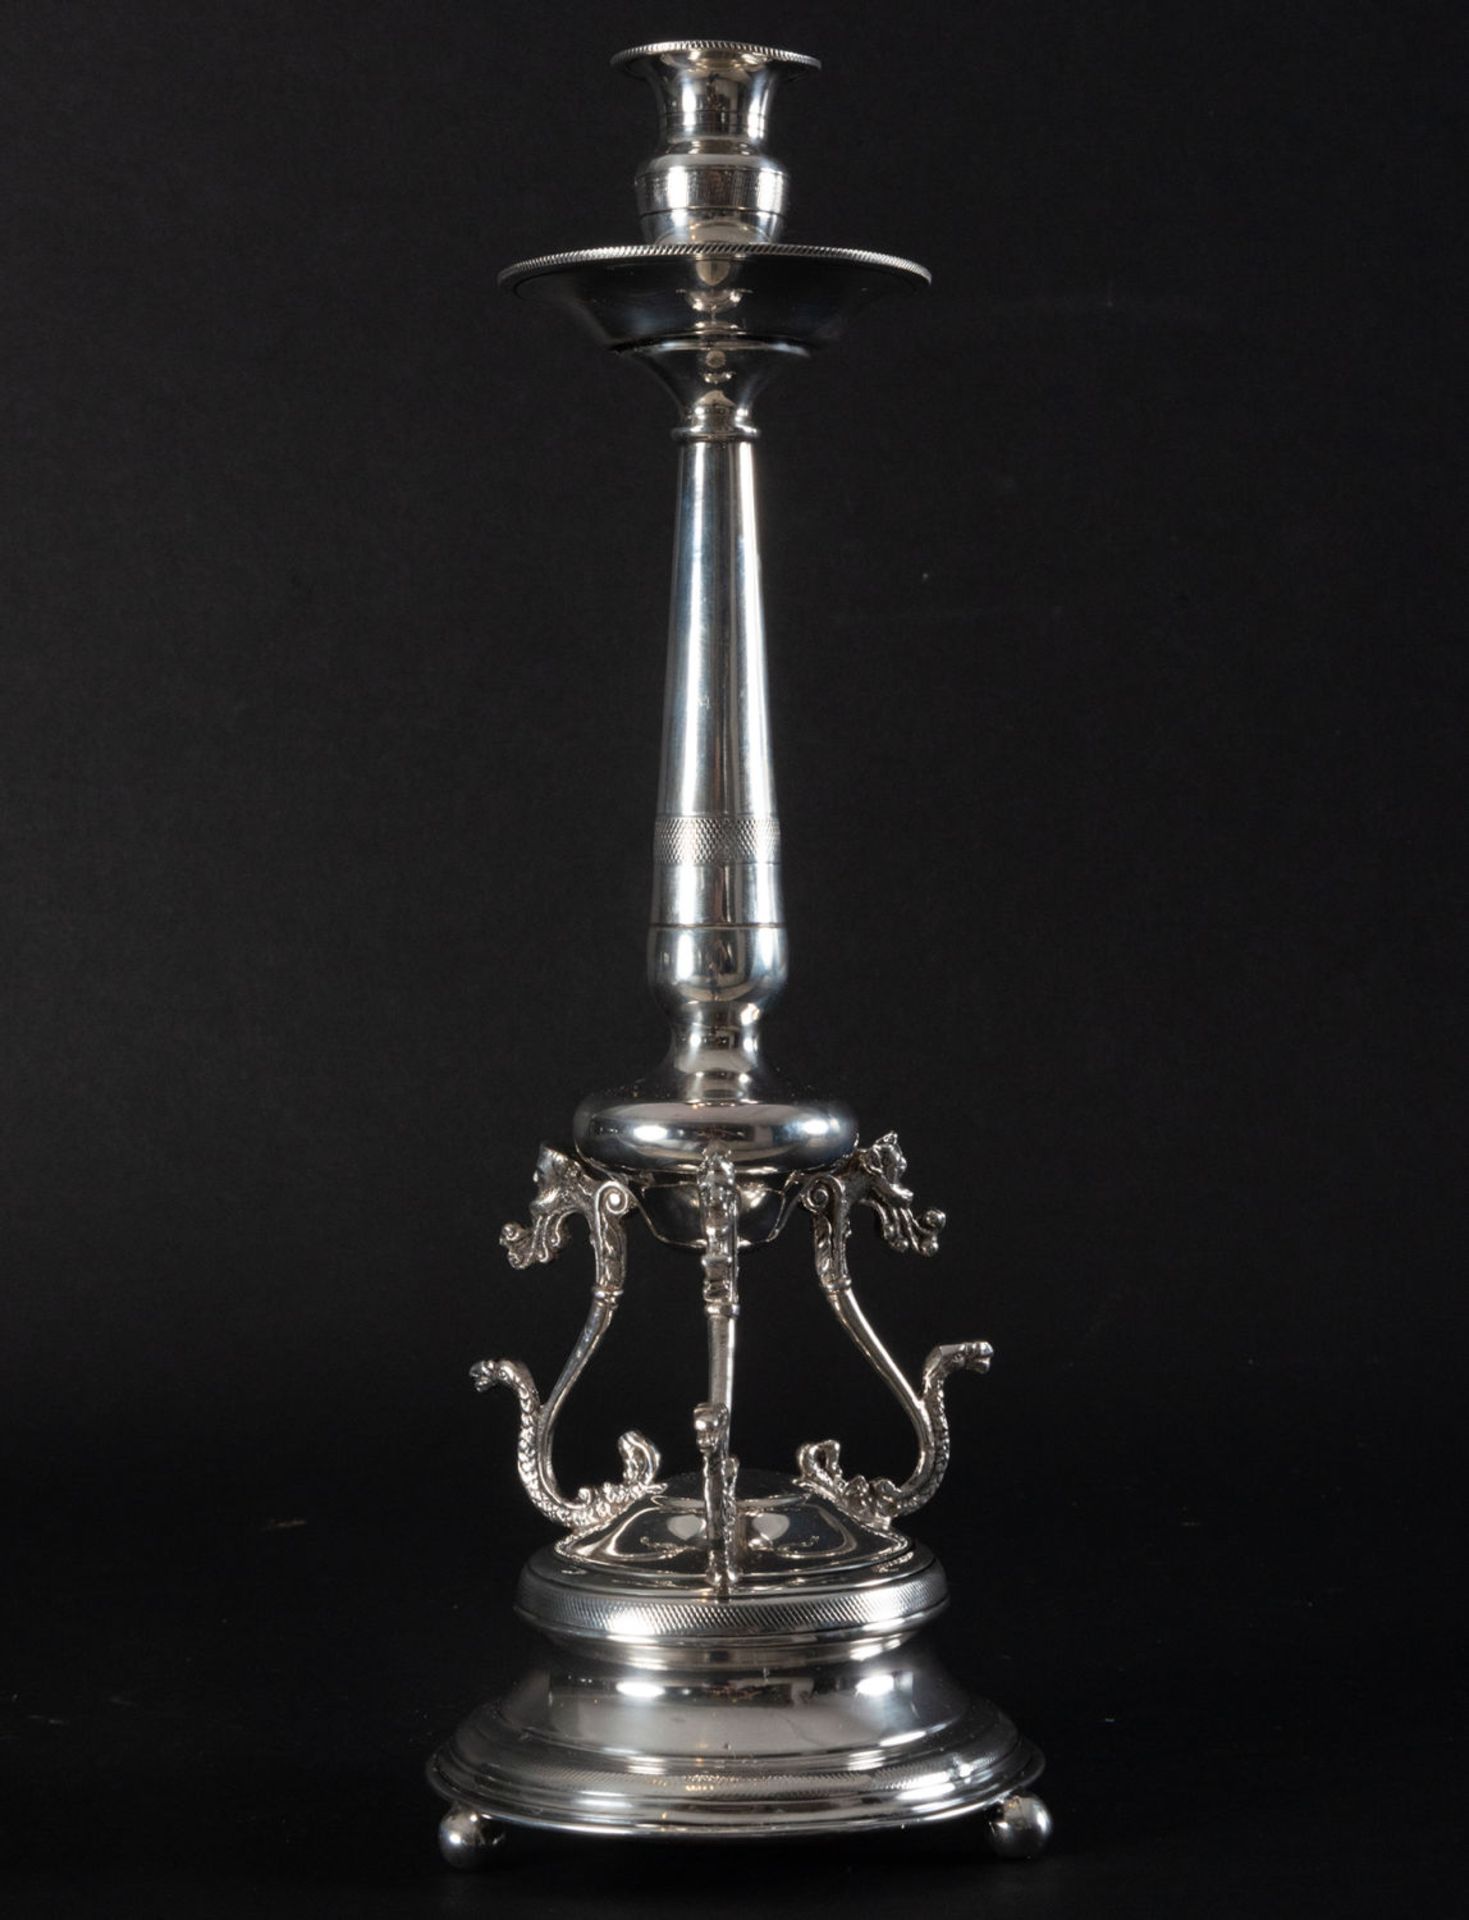 Pair of Spanish Regency-style silver candlesticks, 19th century - Image 2 of 5